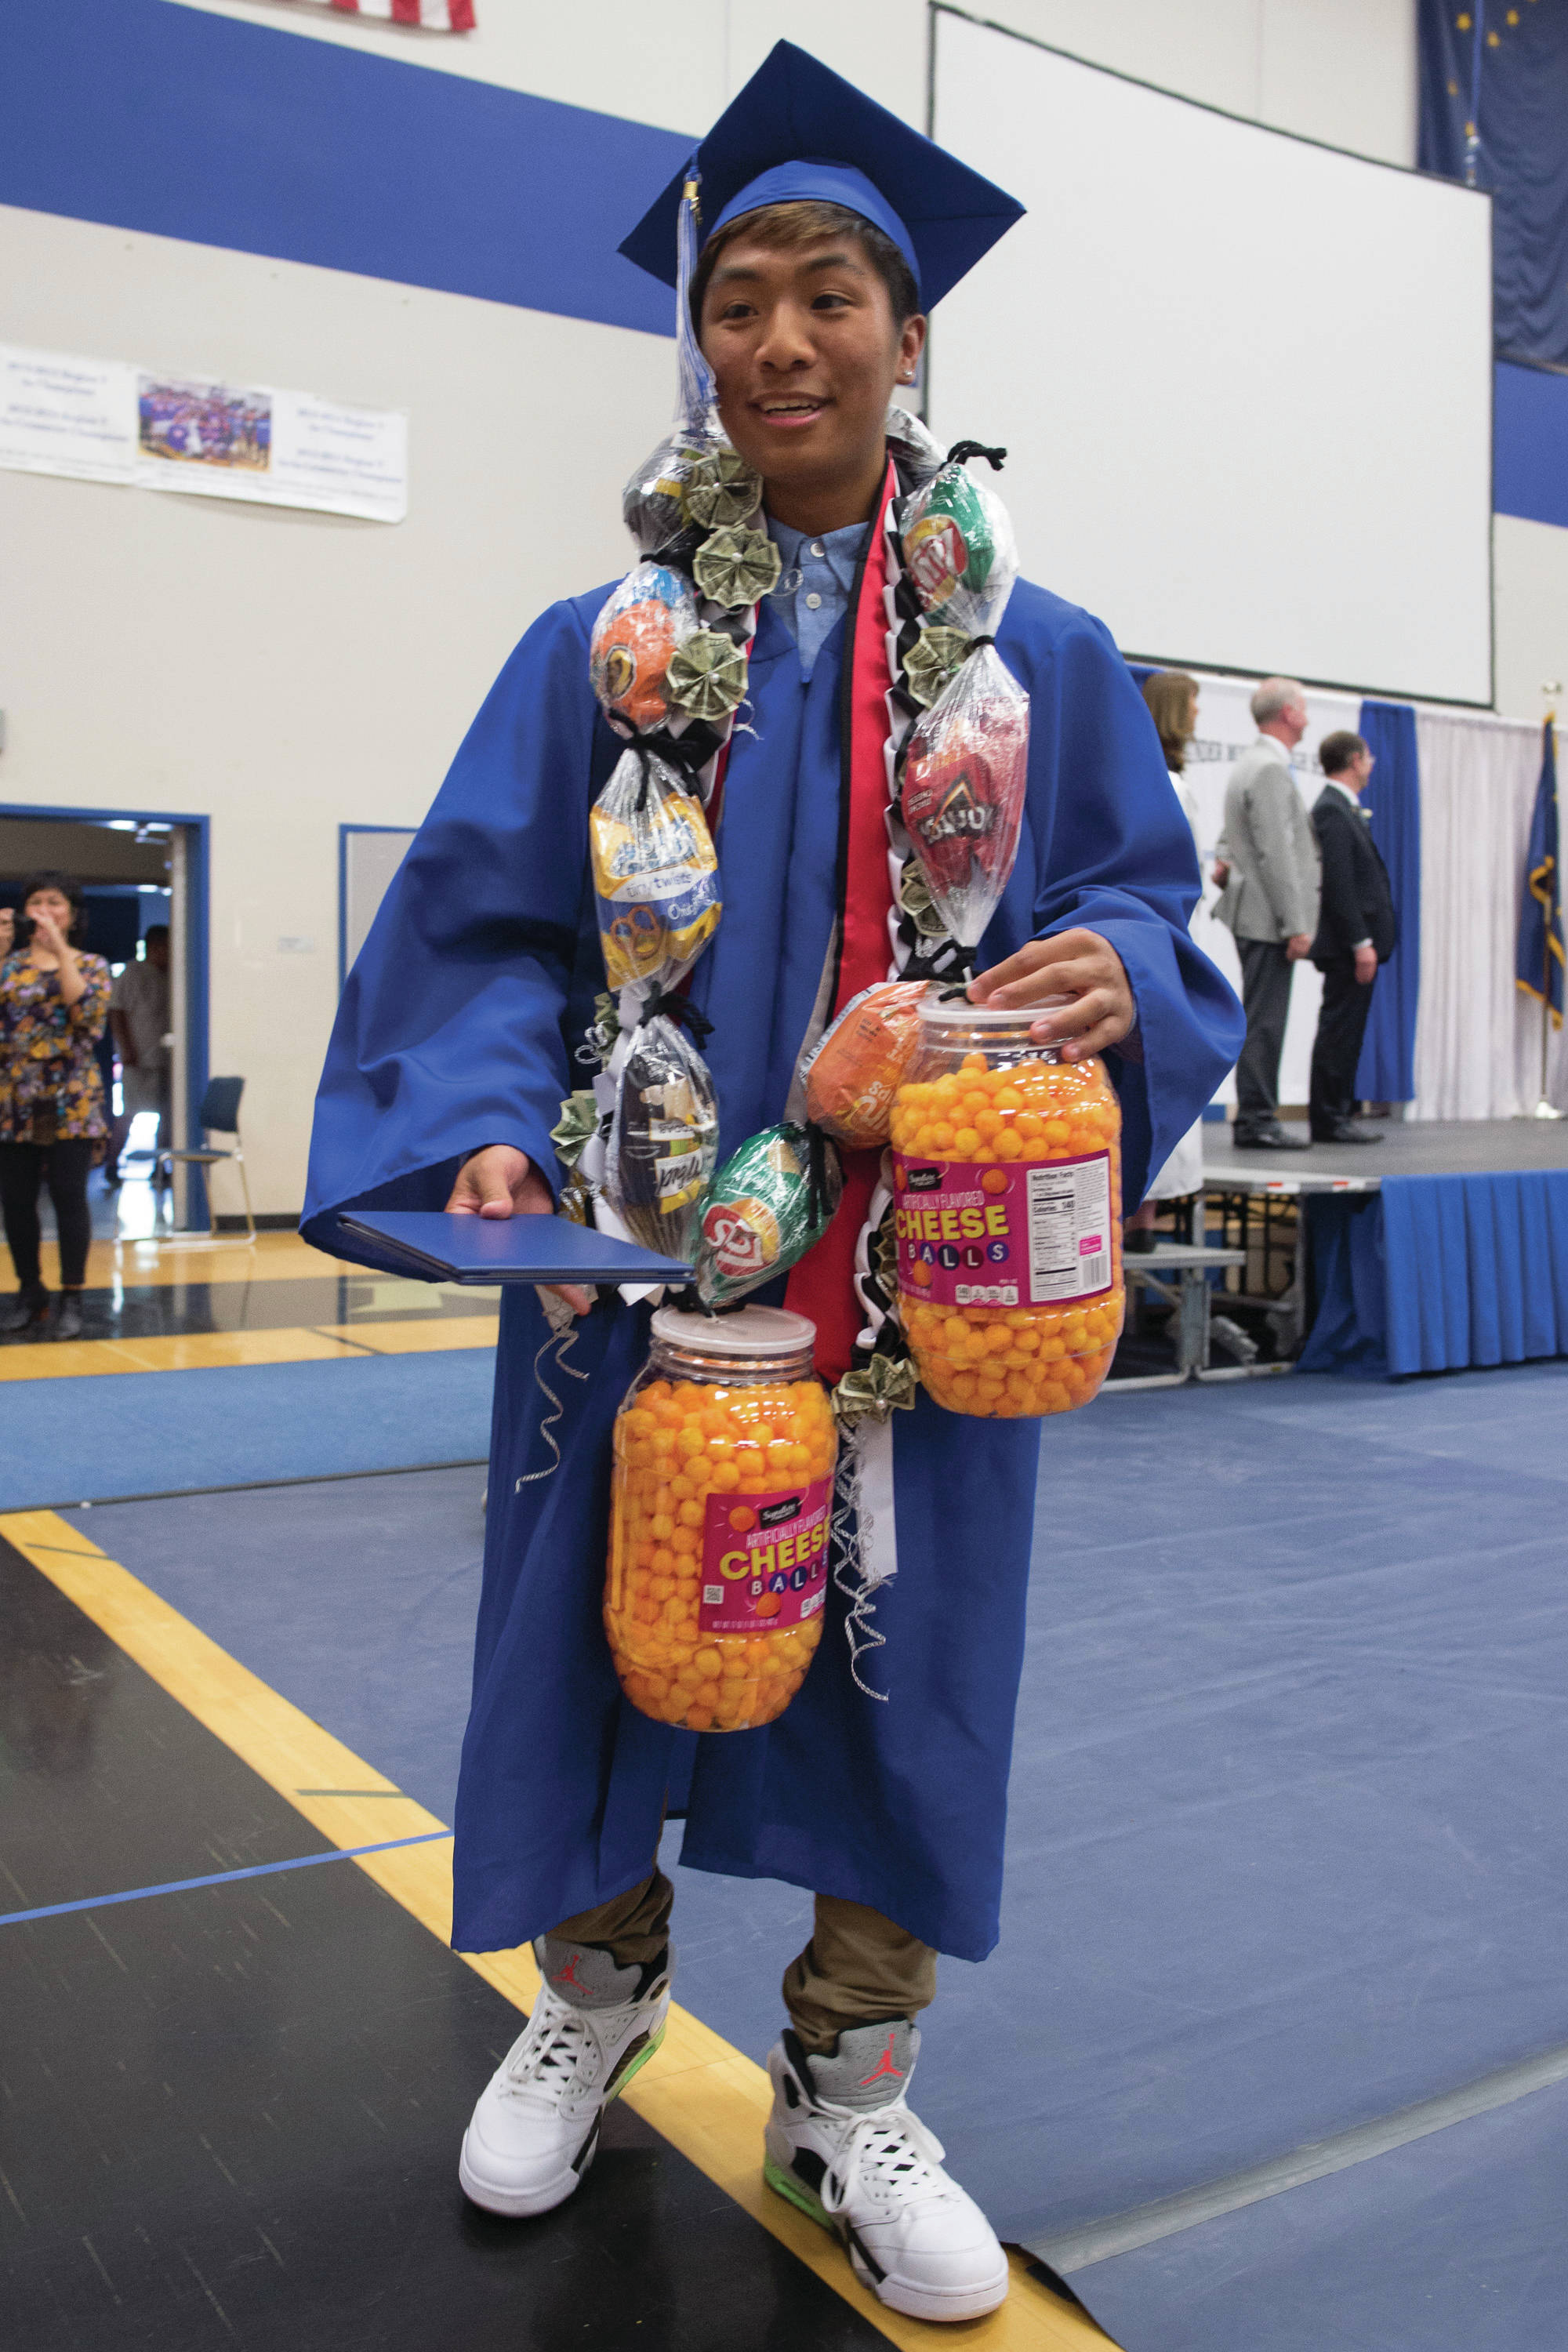 Bernard Yadao gets his diploma and numerous treats from his family during Thunder Mountain High School graduation on Sunday.